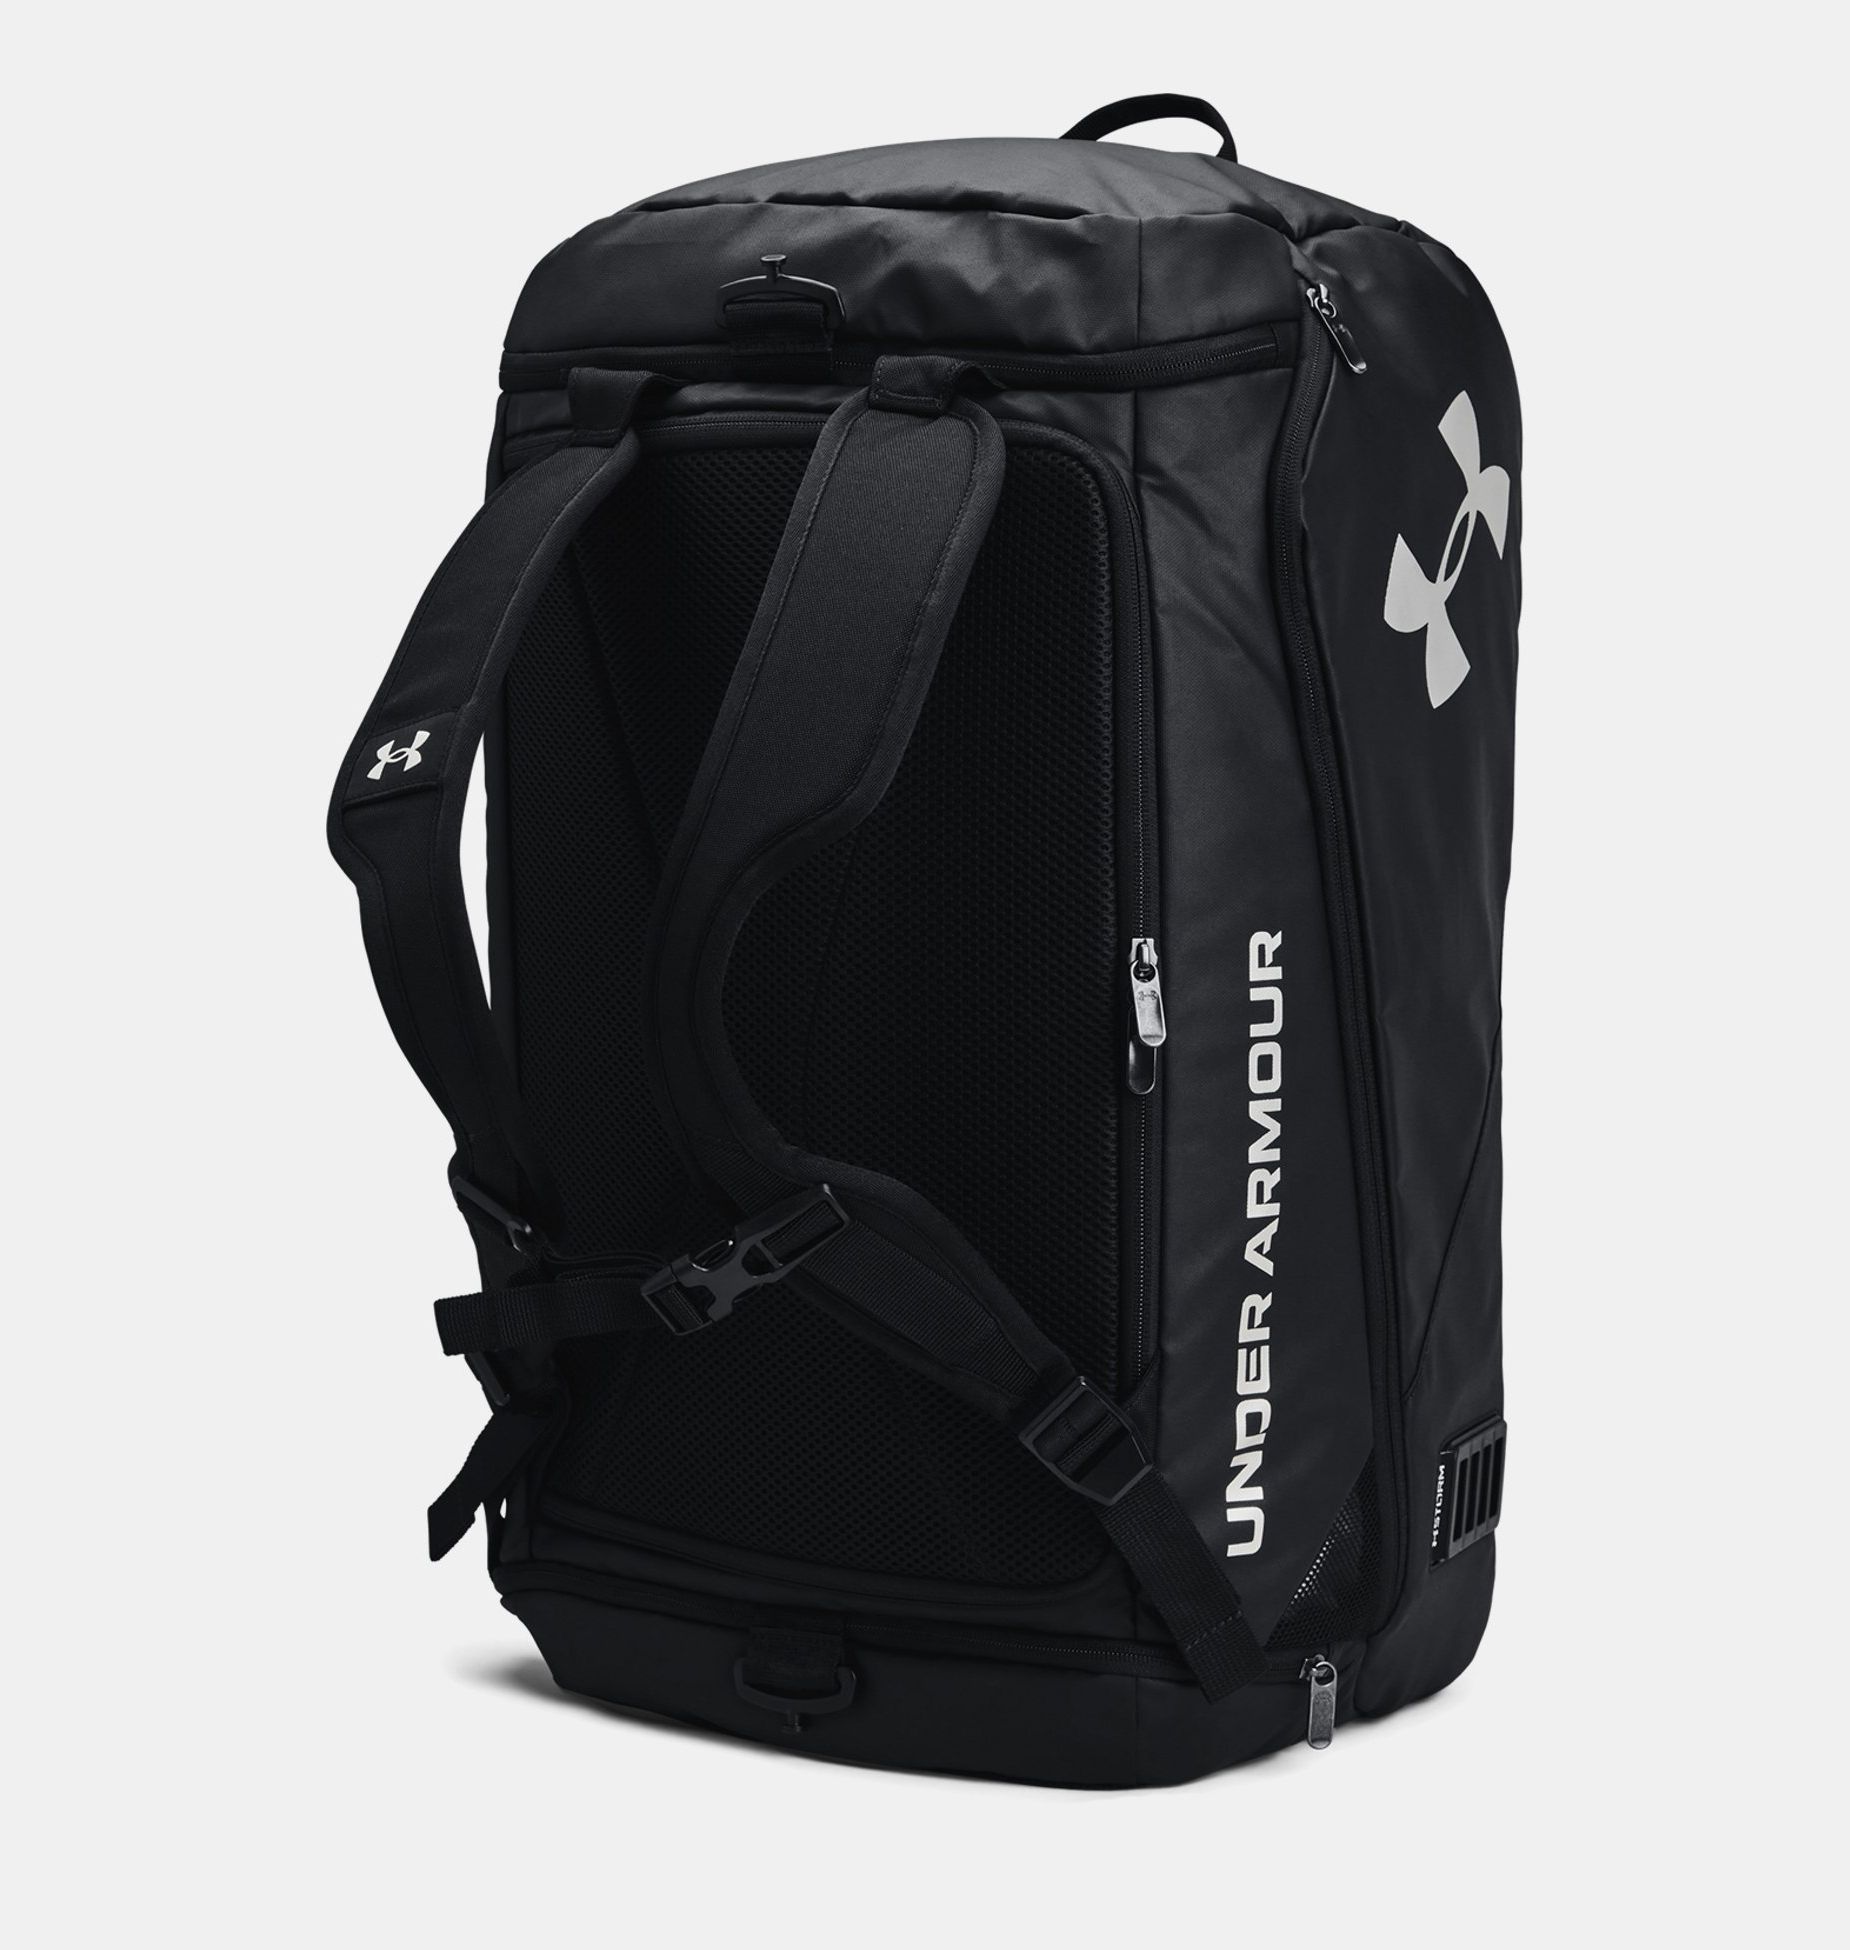 Rucsaci -  under armour Contain Duo MD Backpack Duffle